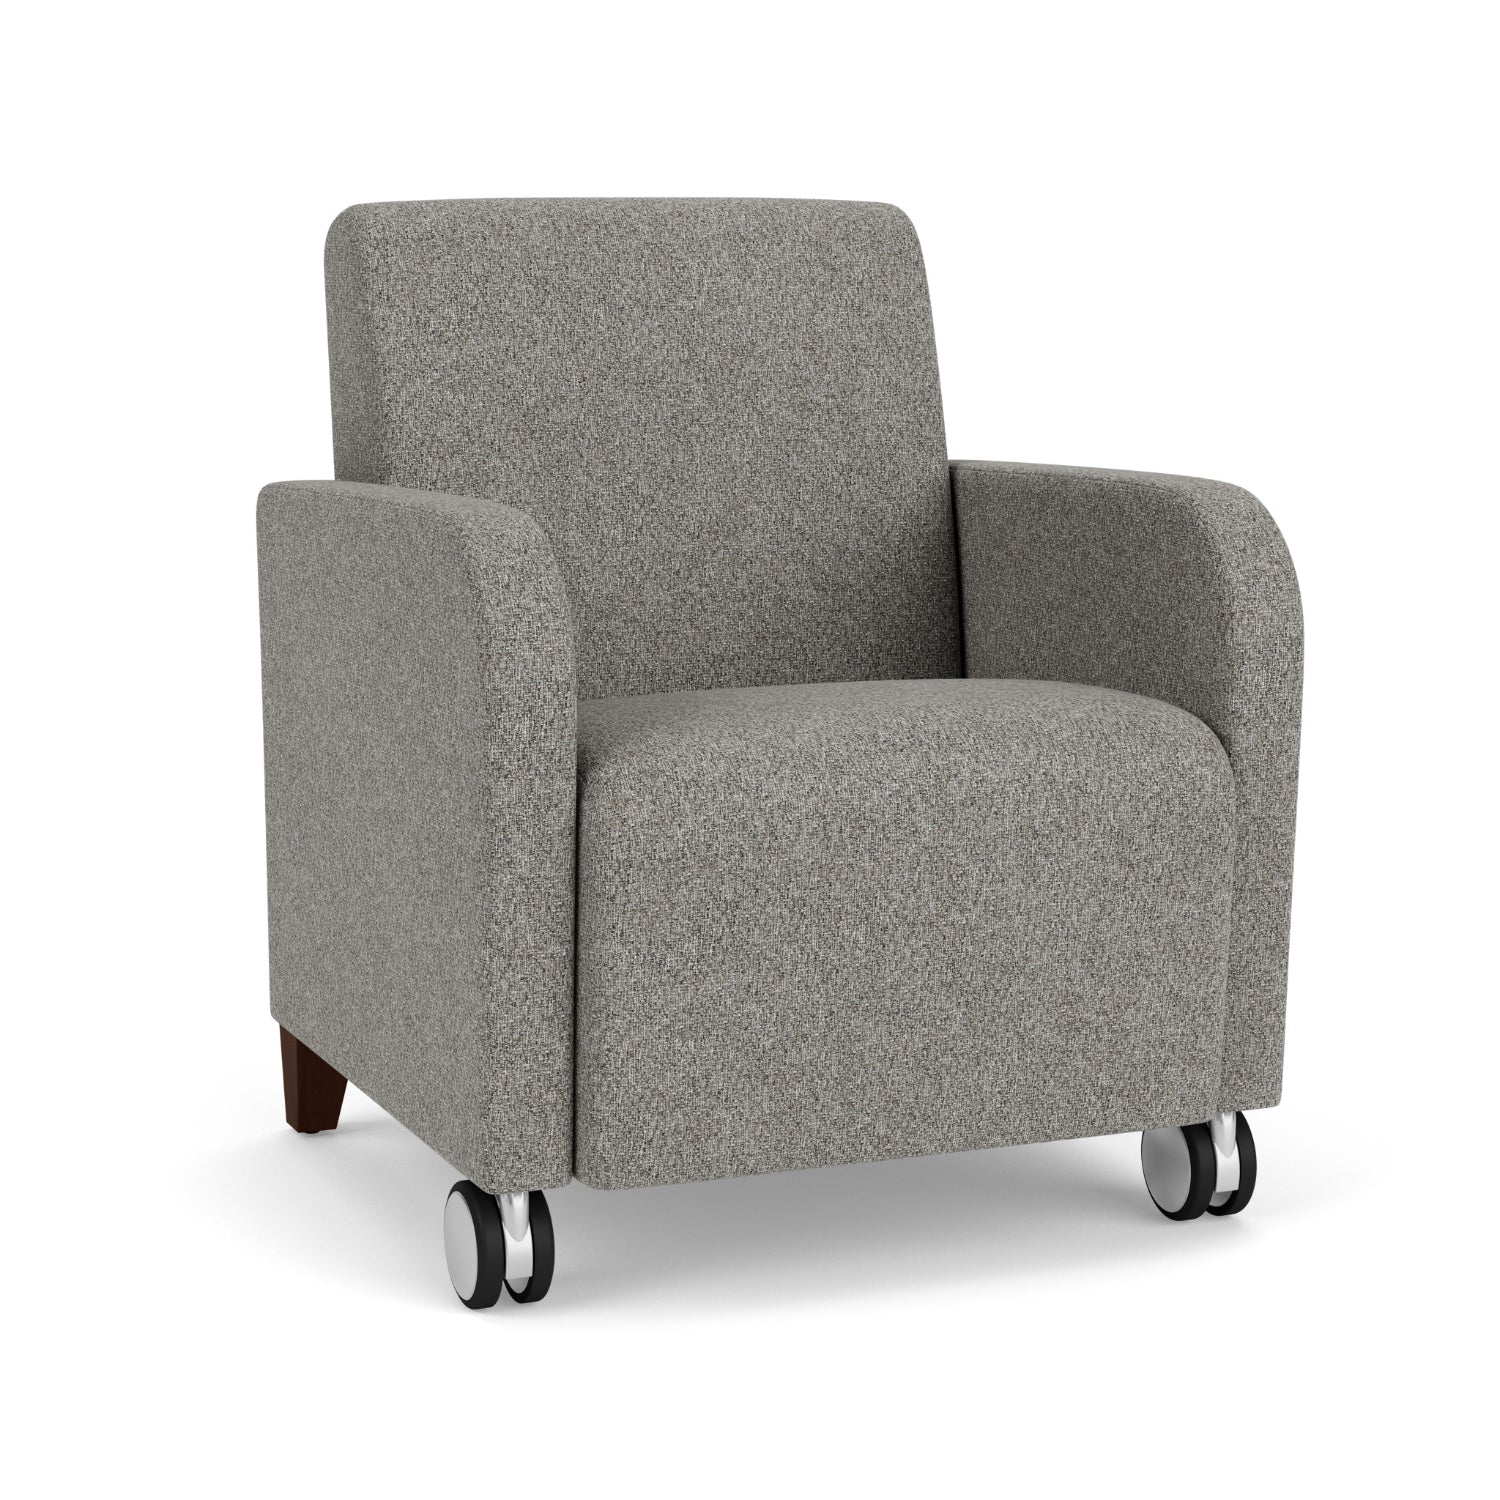 Siena Collection Reception Seating, Guest Chair with Front Casters, 400 lb. Capacity, Standard Fabric Upholstery, FREE SHIPPING